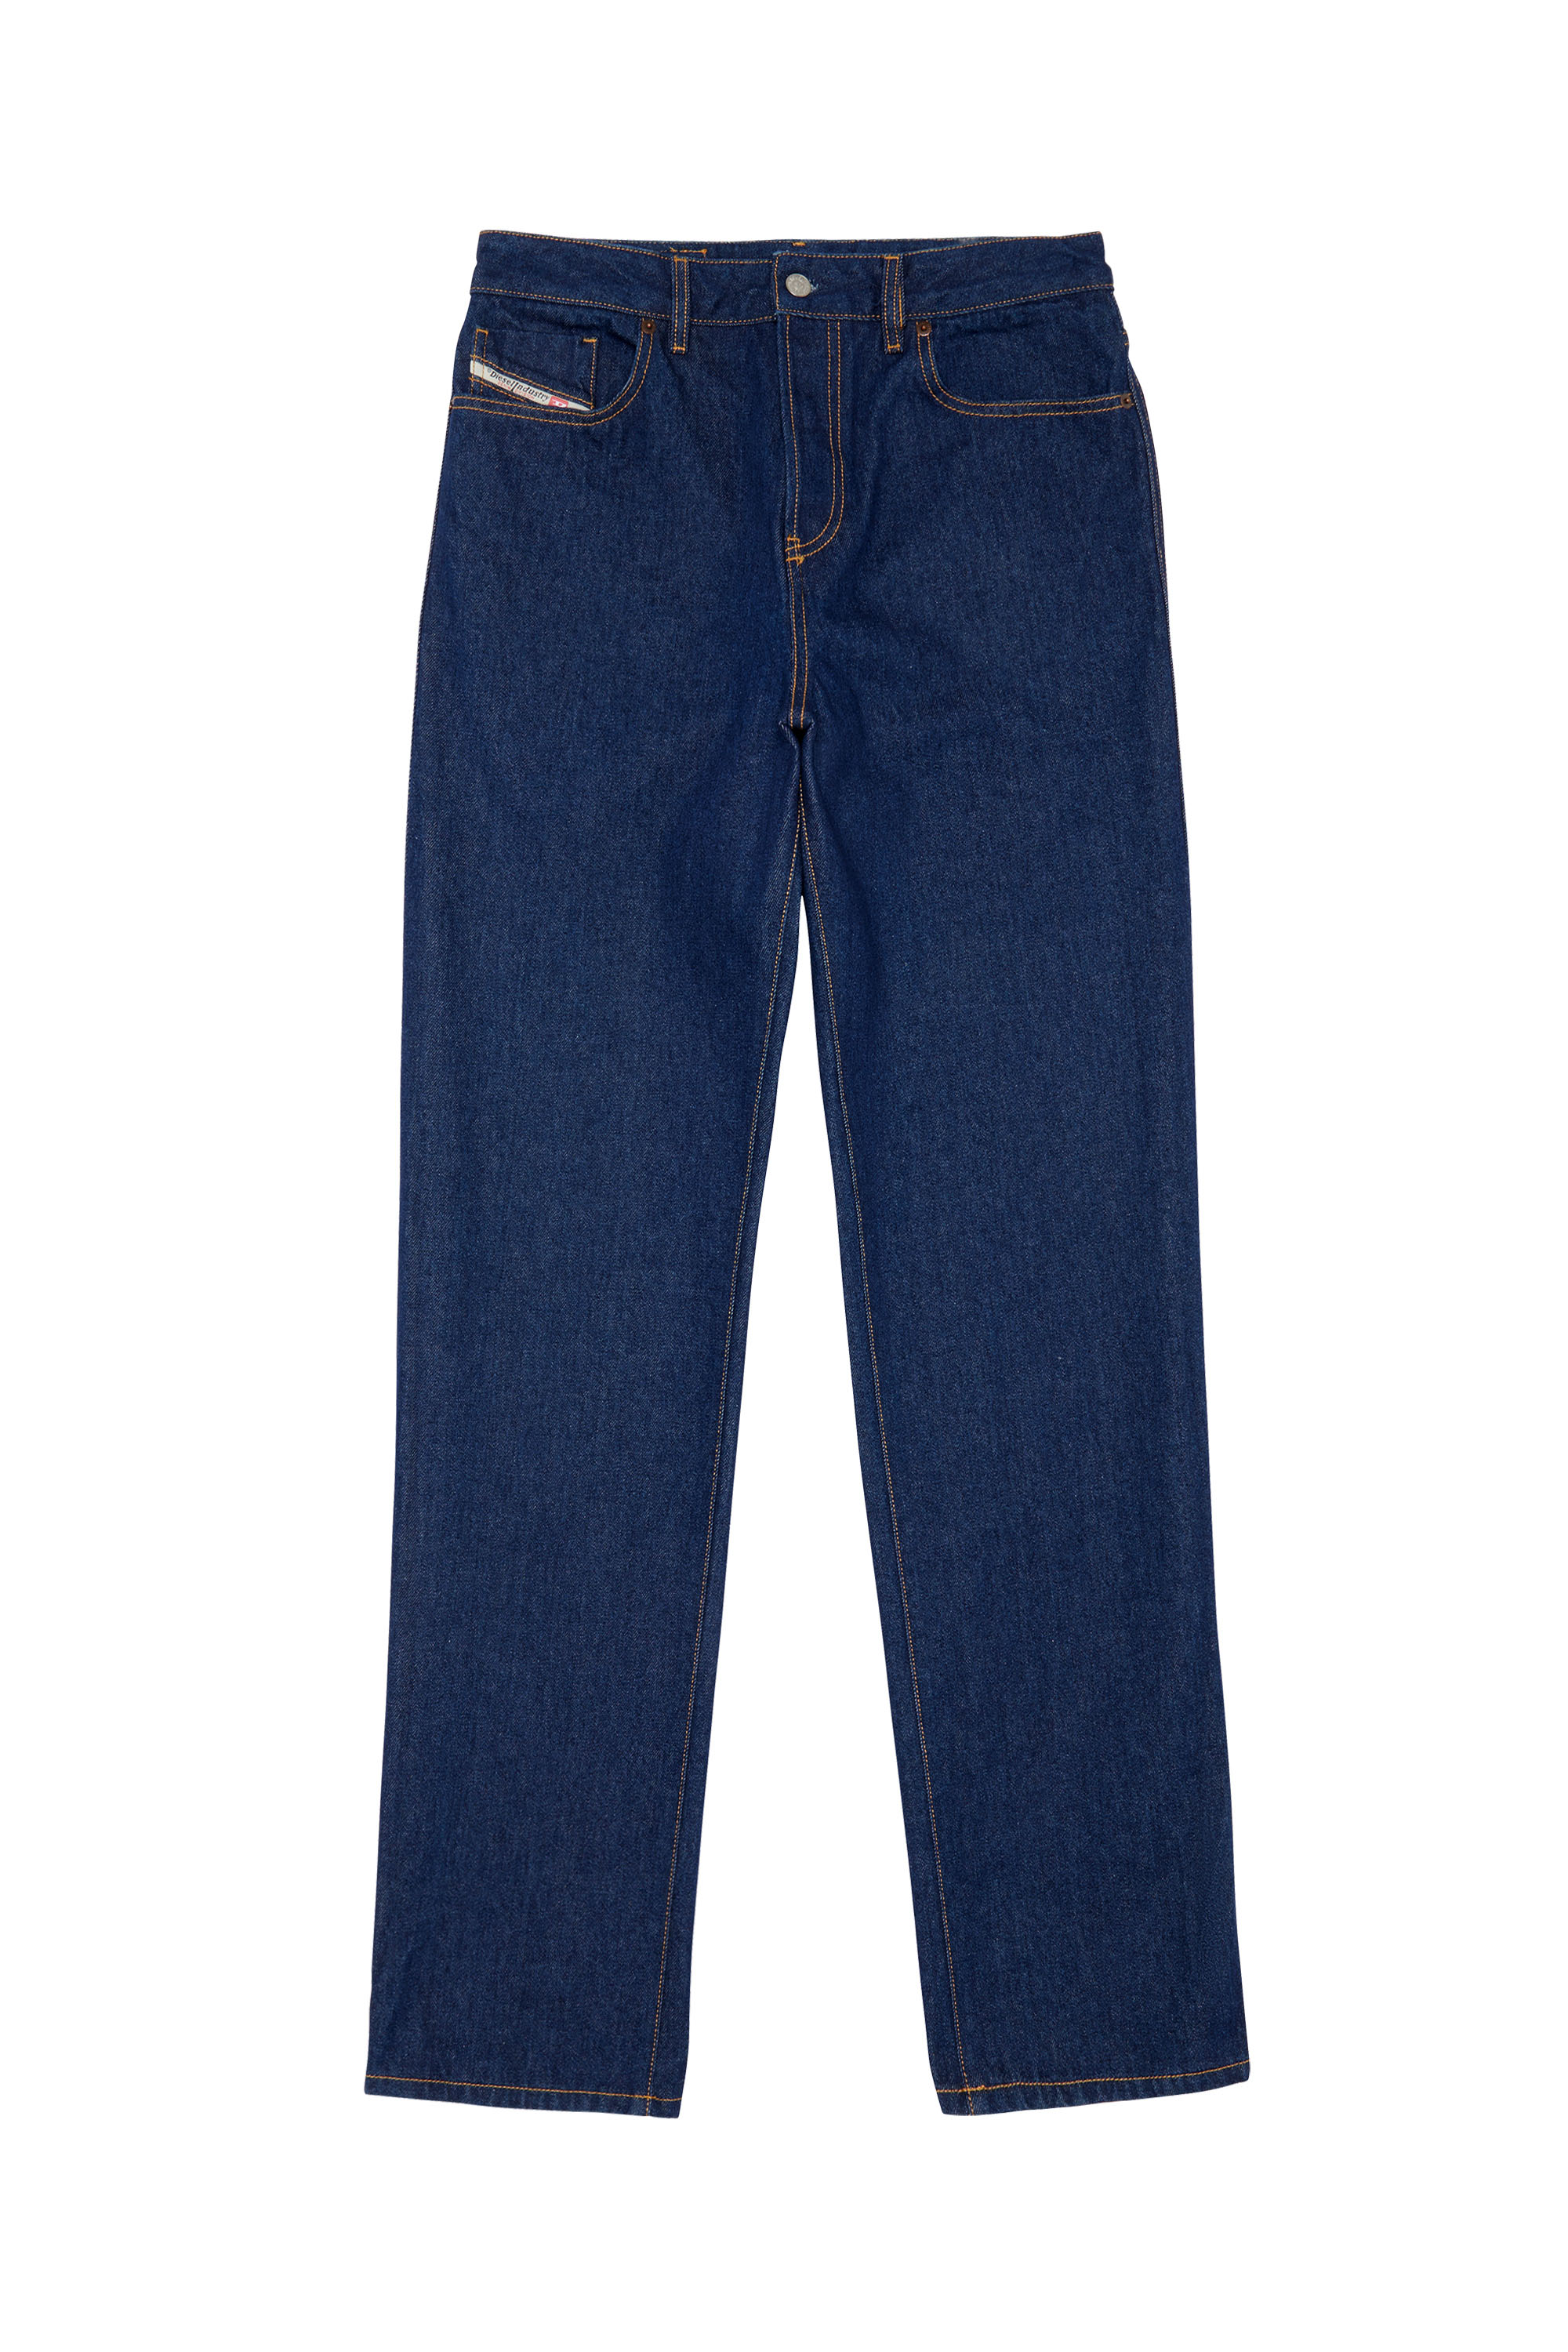 1955 007A5 Straight Jeans, Dark Blue - Jeans